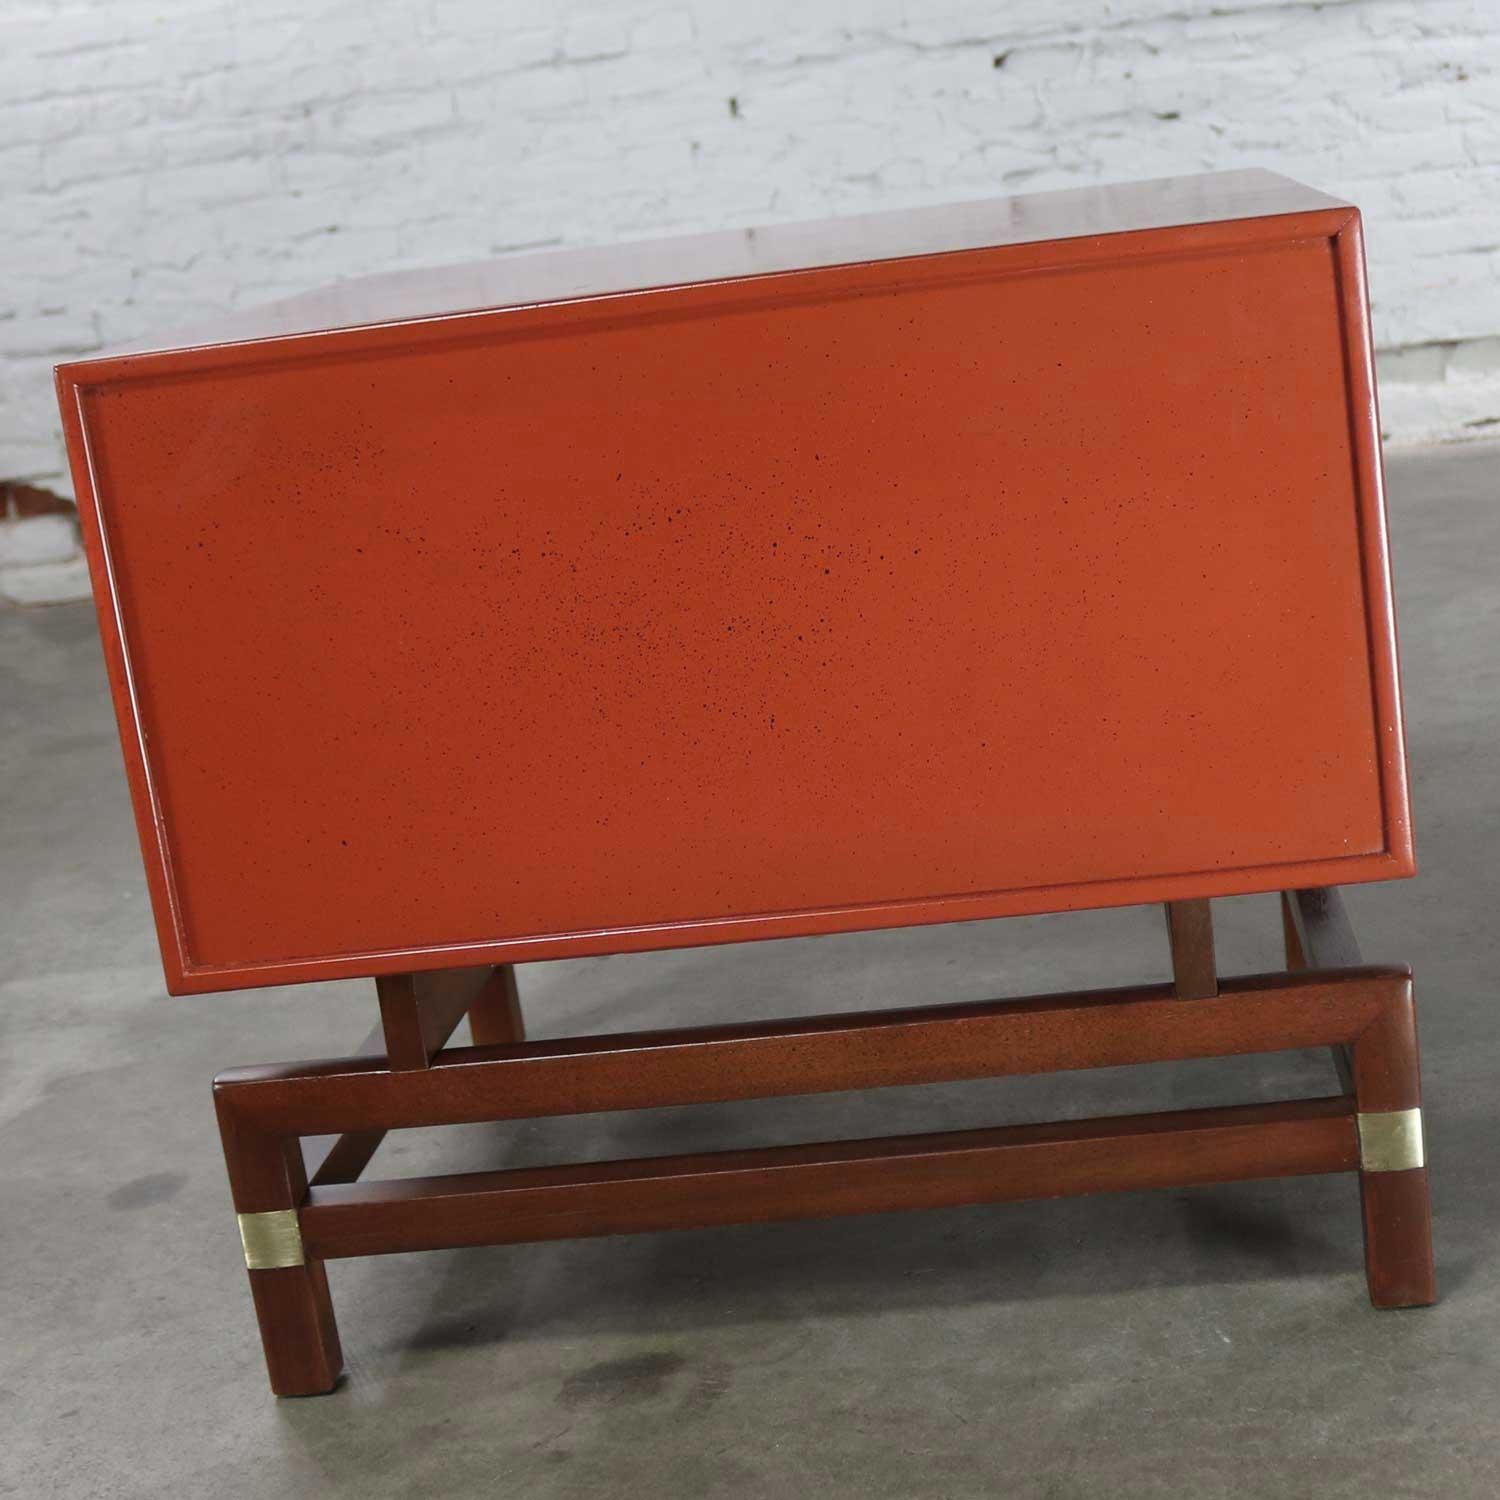 20th Century Vintage Red Campaign Style End Table Drawers and Door & Brass Detail by Hickory